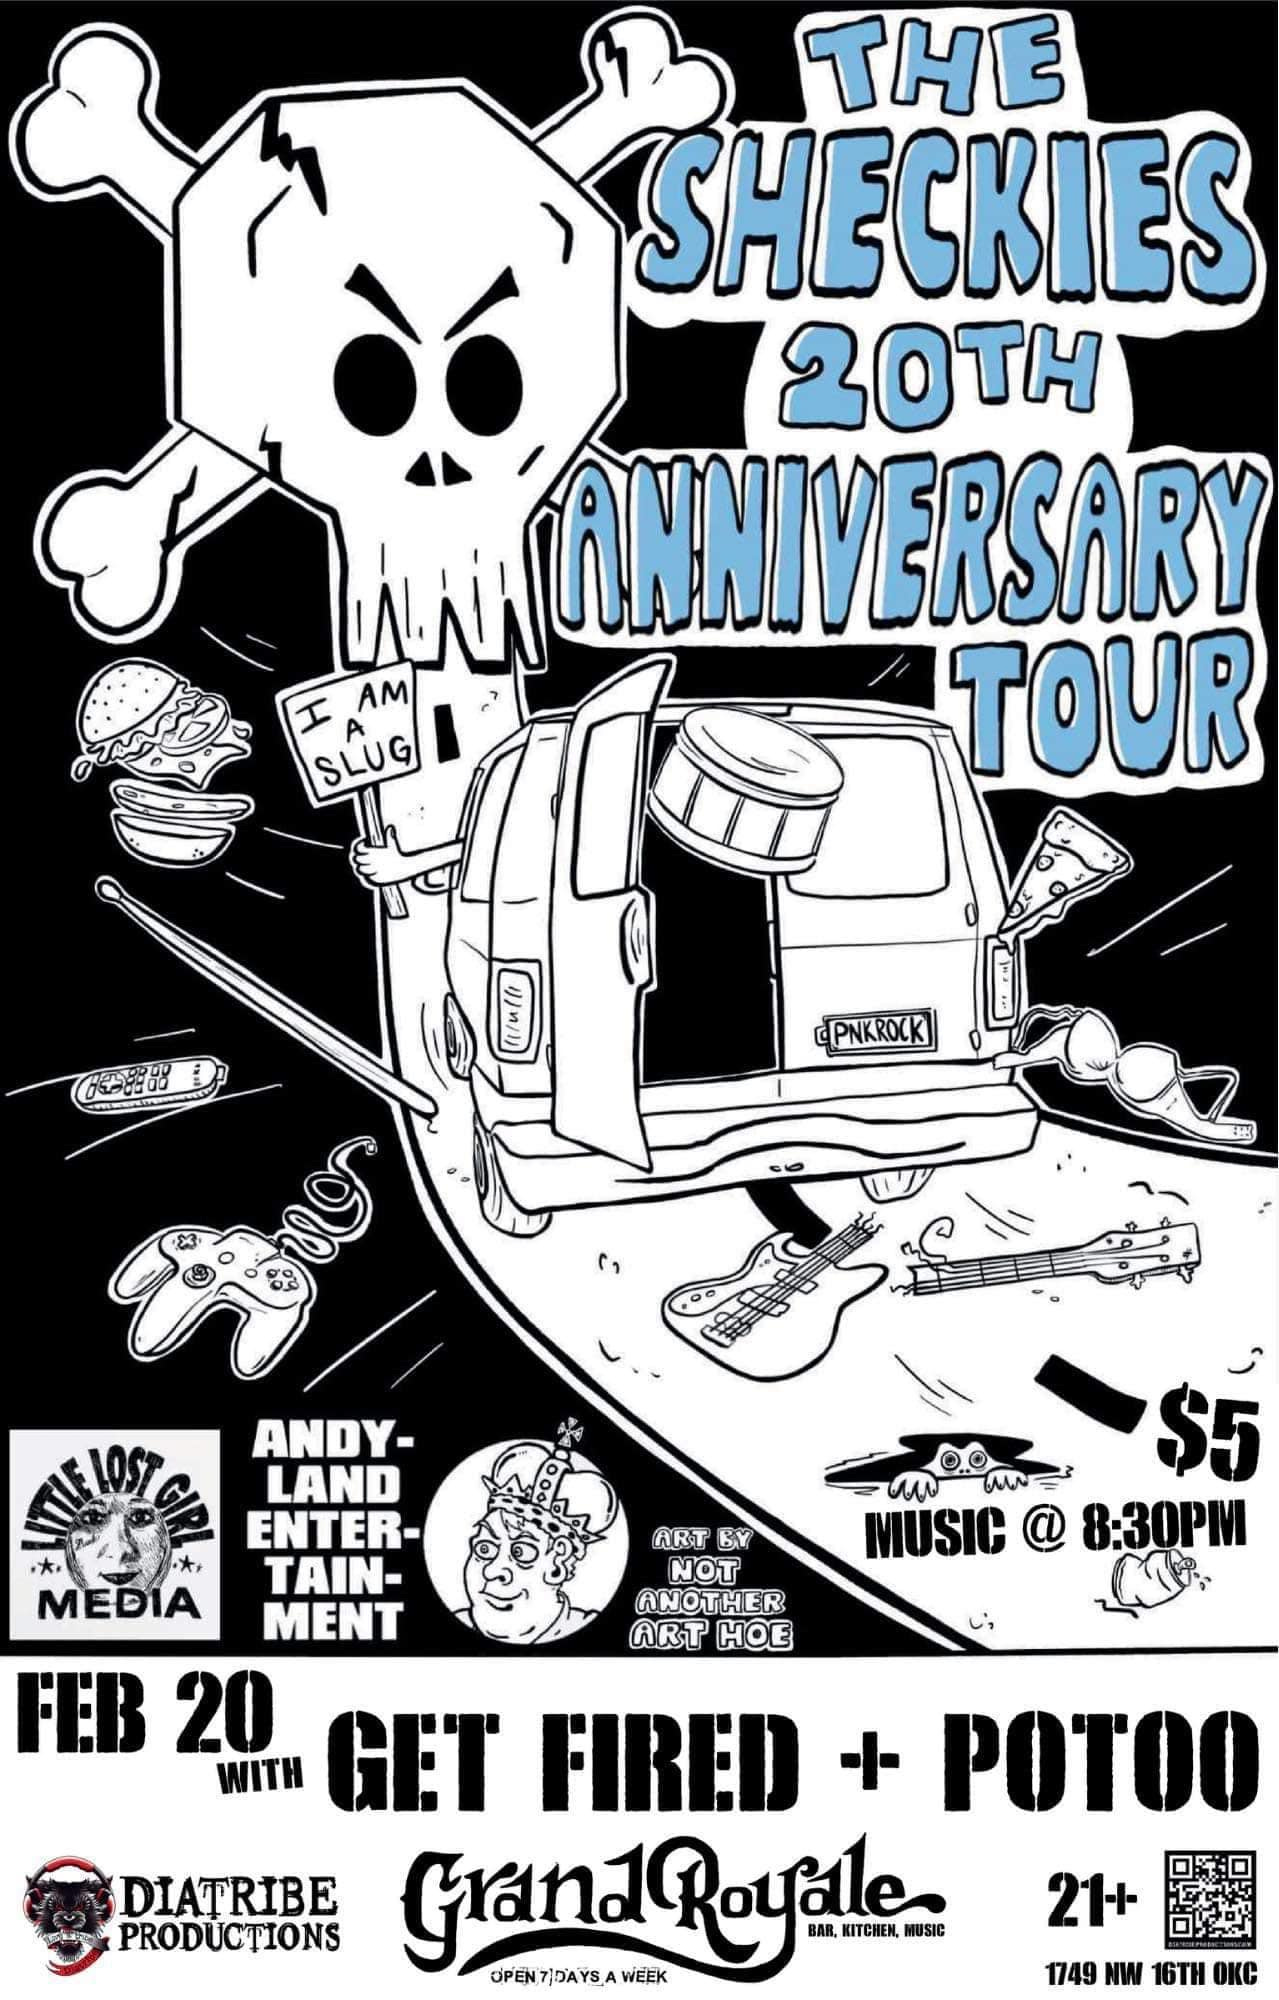 May be an image of ‎text that says '‎THE SHECKIES 20TH بيا AM ANNIVERSARY SLUG TOUR PNKROCK لدکون ART BY NOT ANOTHER ART HOE $5 MUSIC @ 8:30PM ANDY- LAND ENTER- TAIN- MEDIA MENT FEB 20 WITH GET FIRED + POTOO Gran1Roya KITCHEN, 21+ 1749 NW 16TH oKc DIATRIBE PRODUCTIONS‎'‎